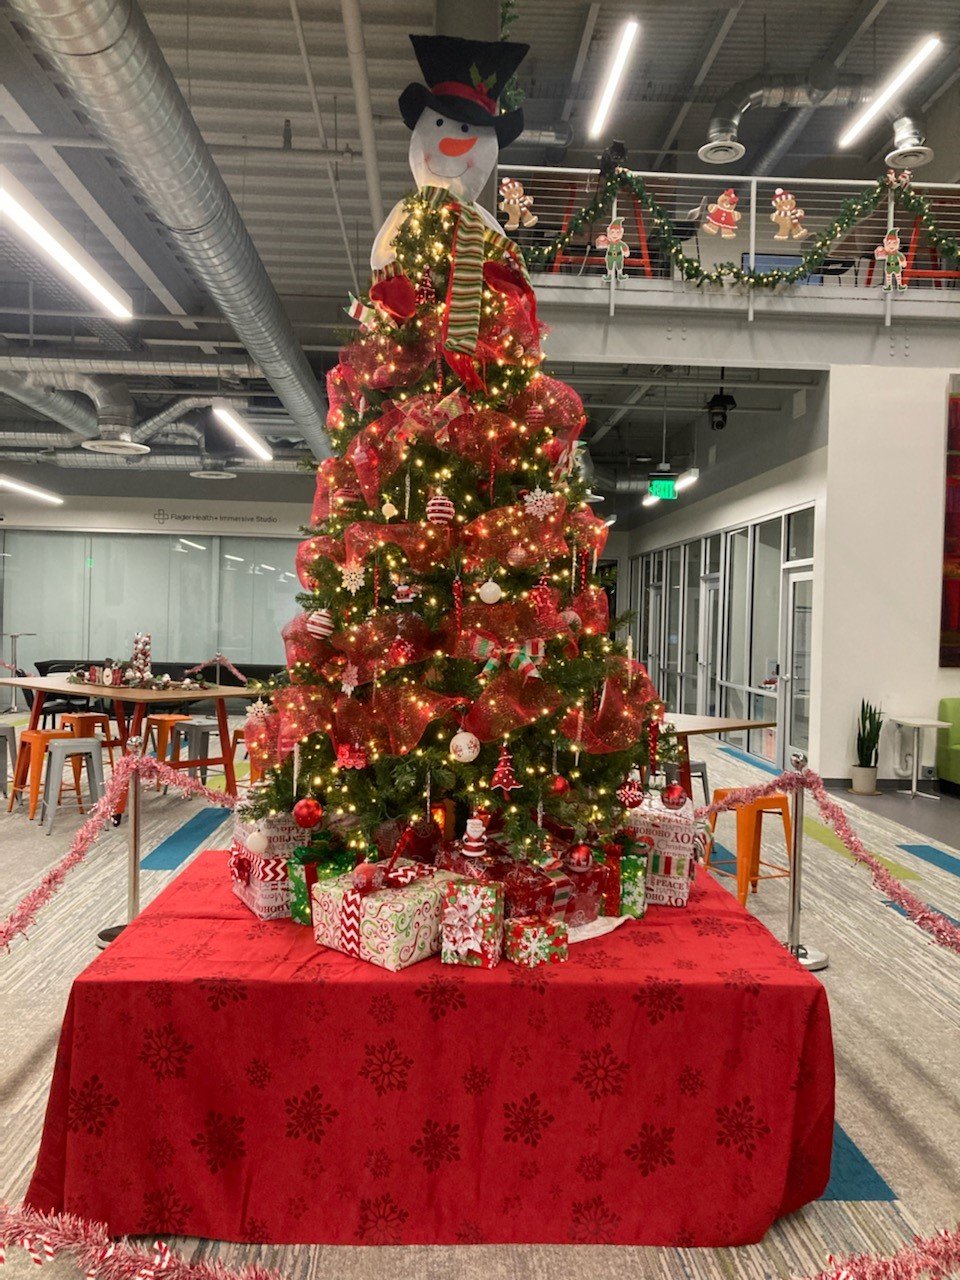 A festive Christmas tree stands tall in the main gathering area at the link.